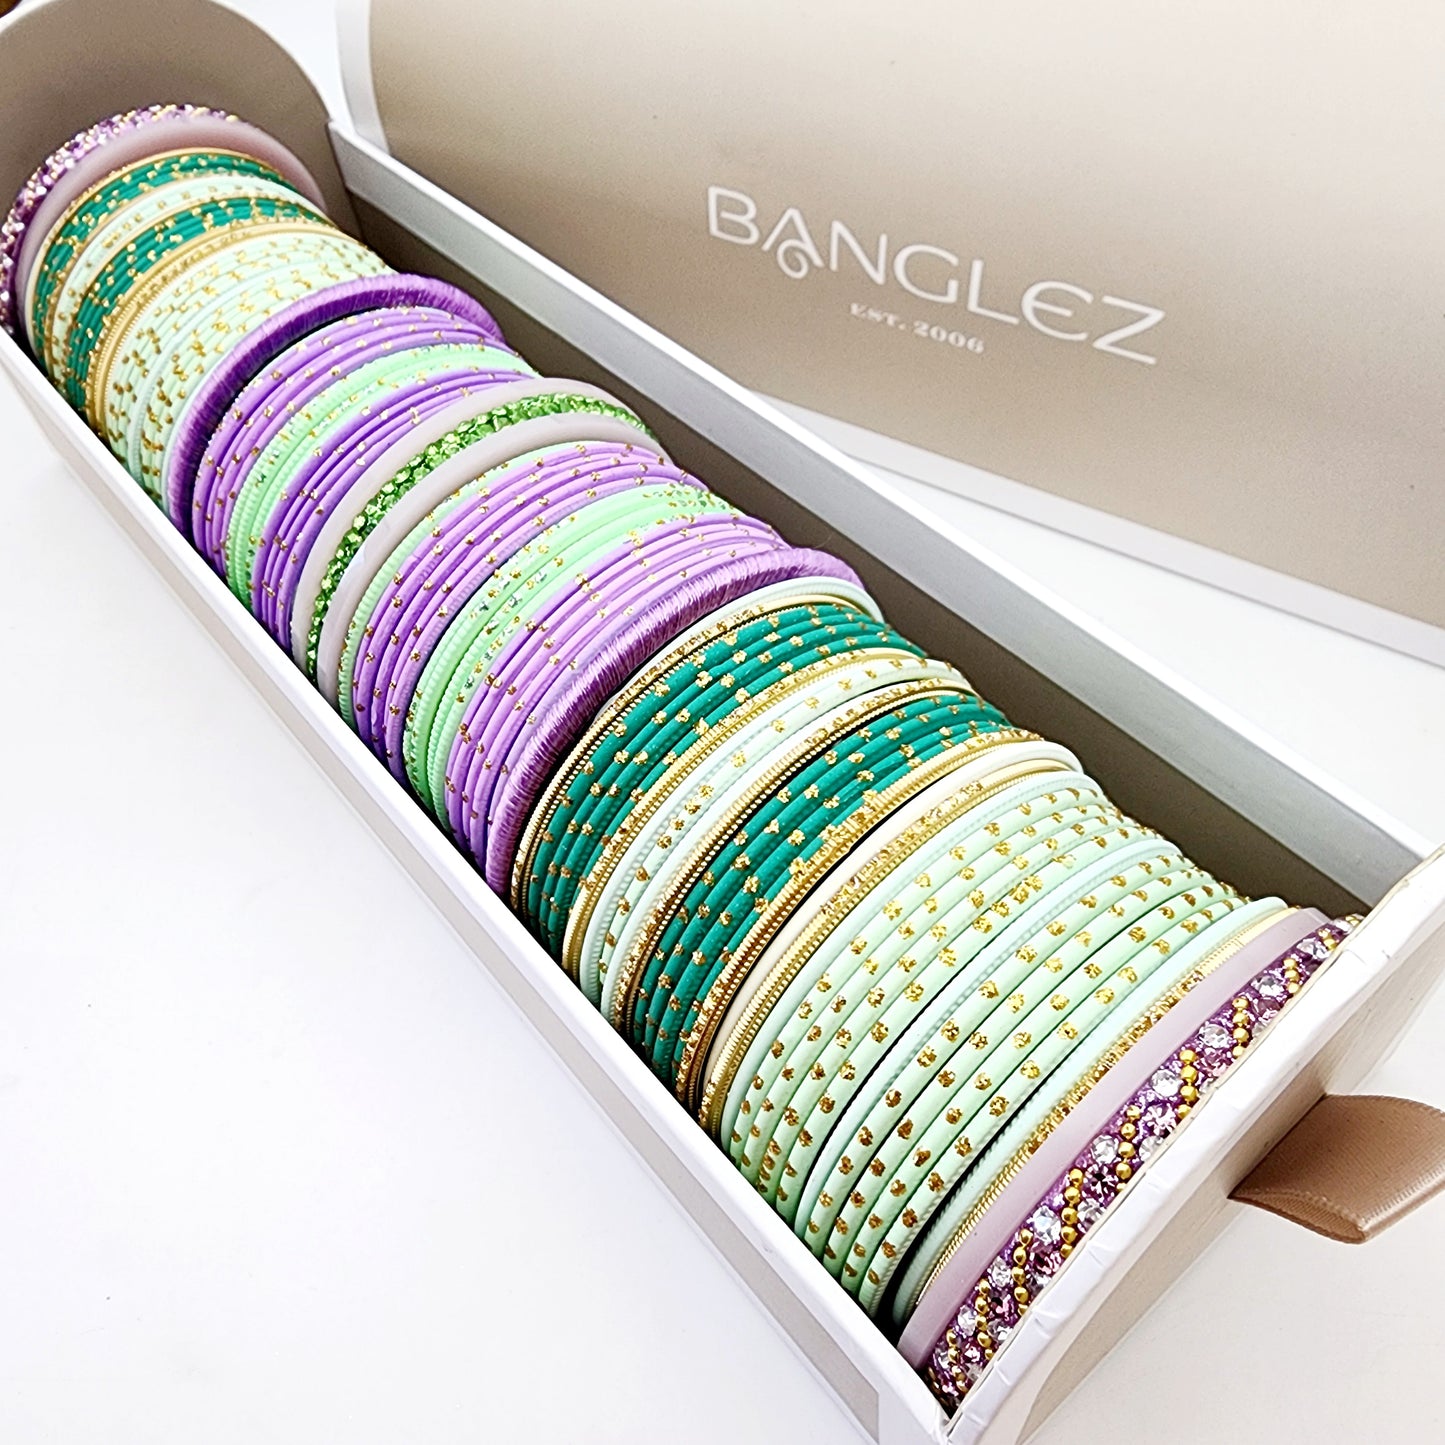 Vivian Banglez Chest Indian Bangles , South Asian Bangles , Pakistani Bangles , Desi Bangles , Punjabi Bangles , Tamil Bangles , Indian Jewelry